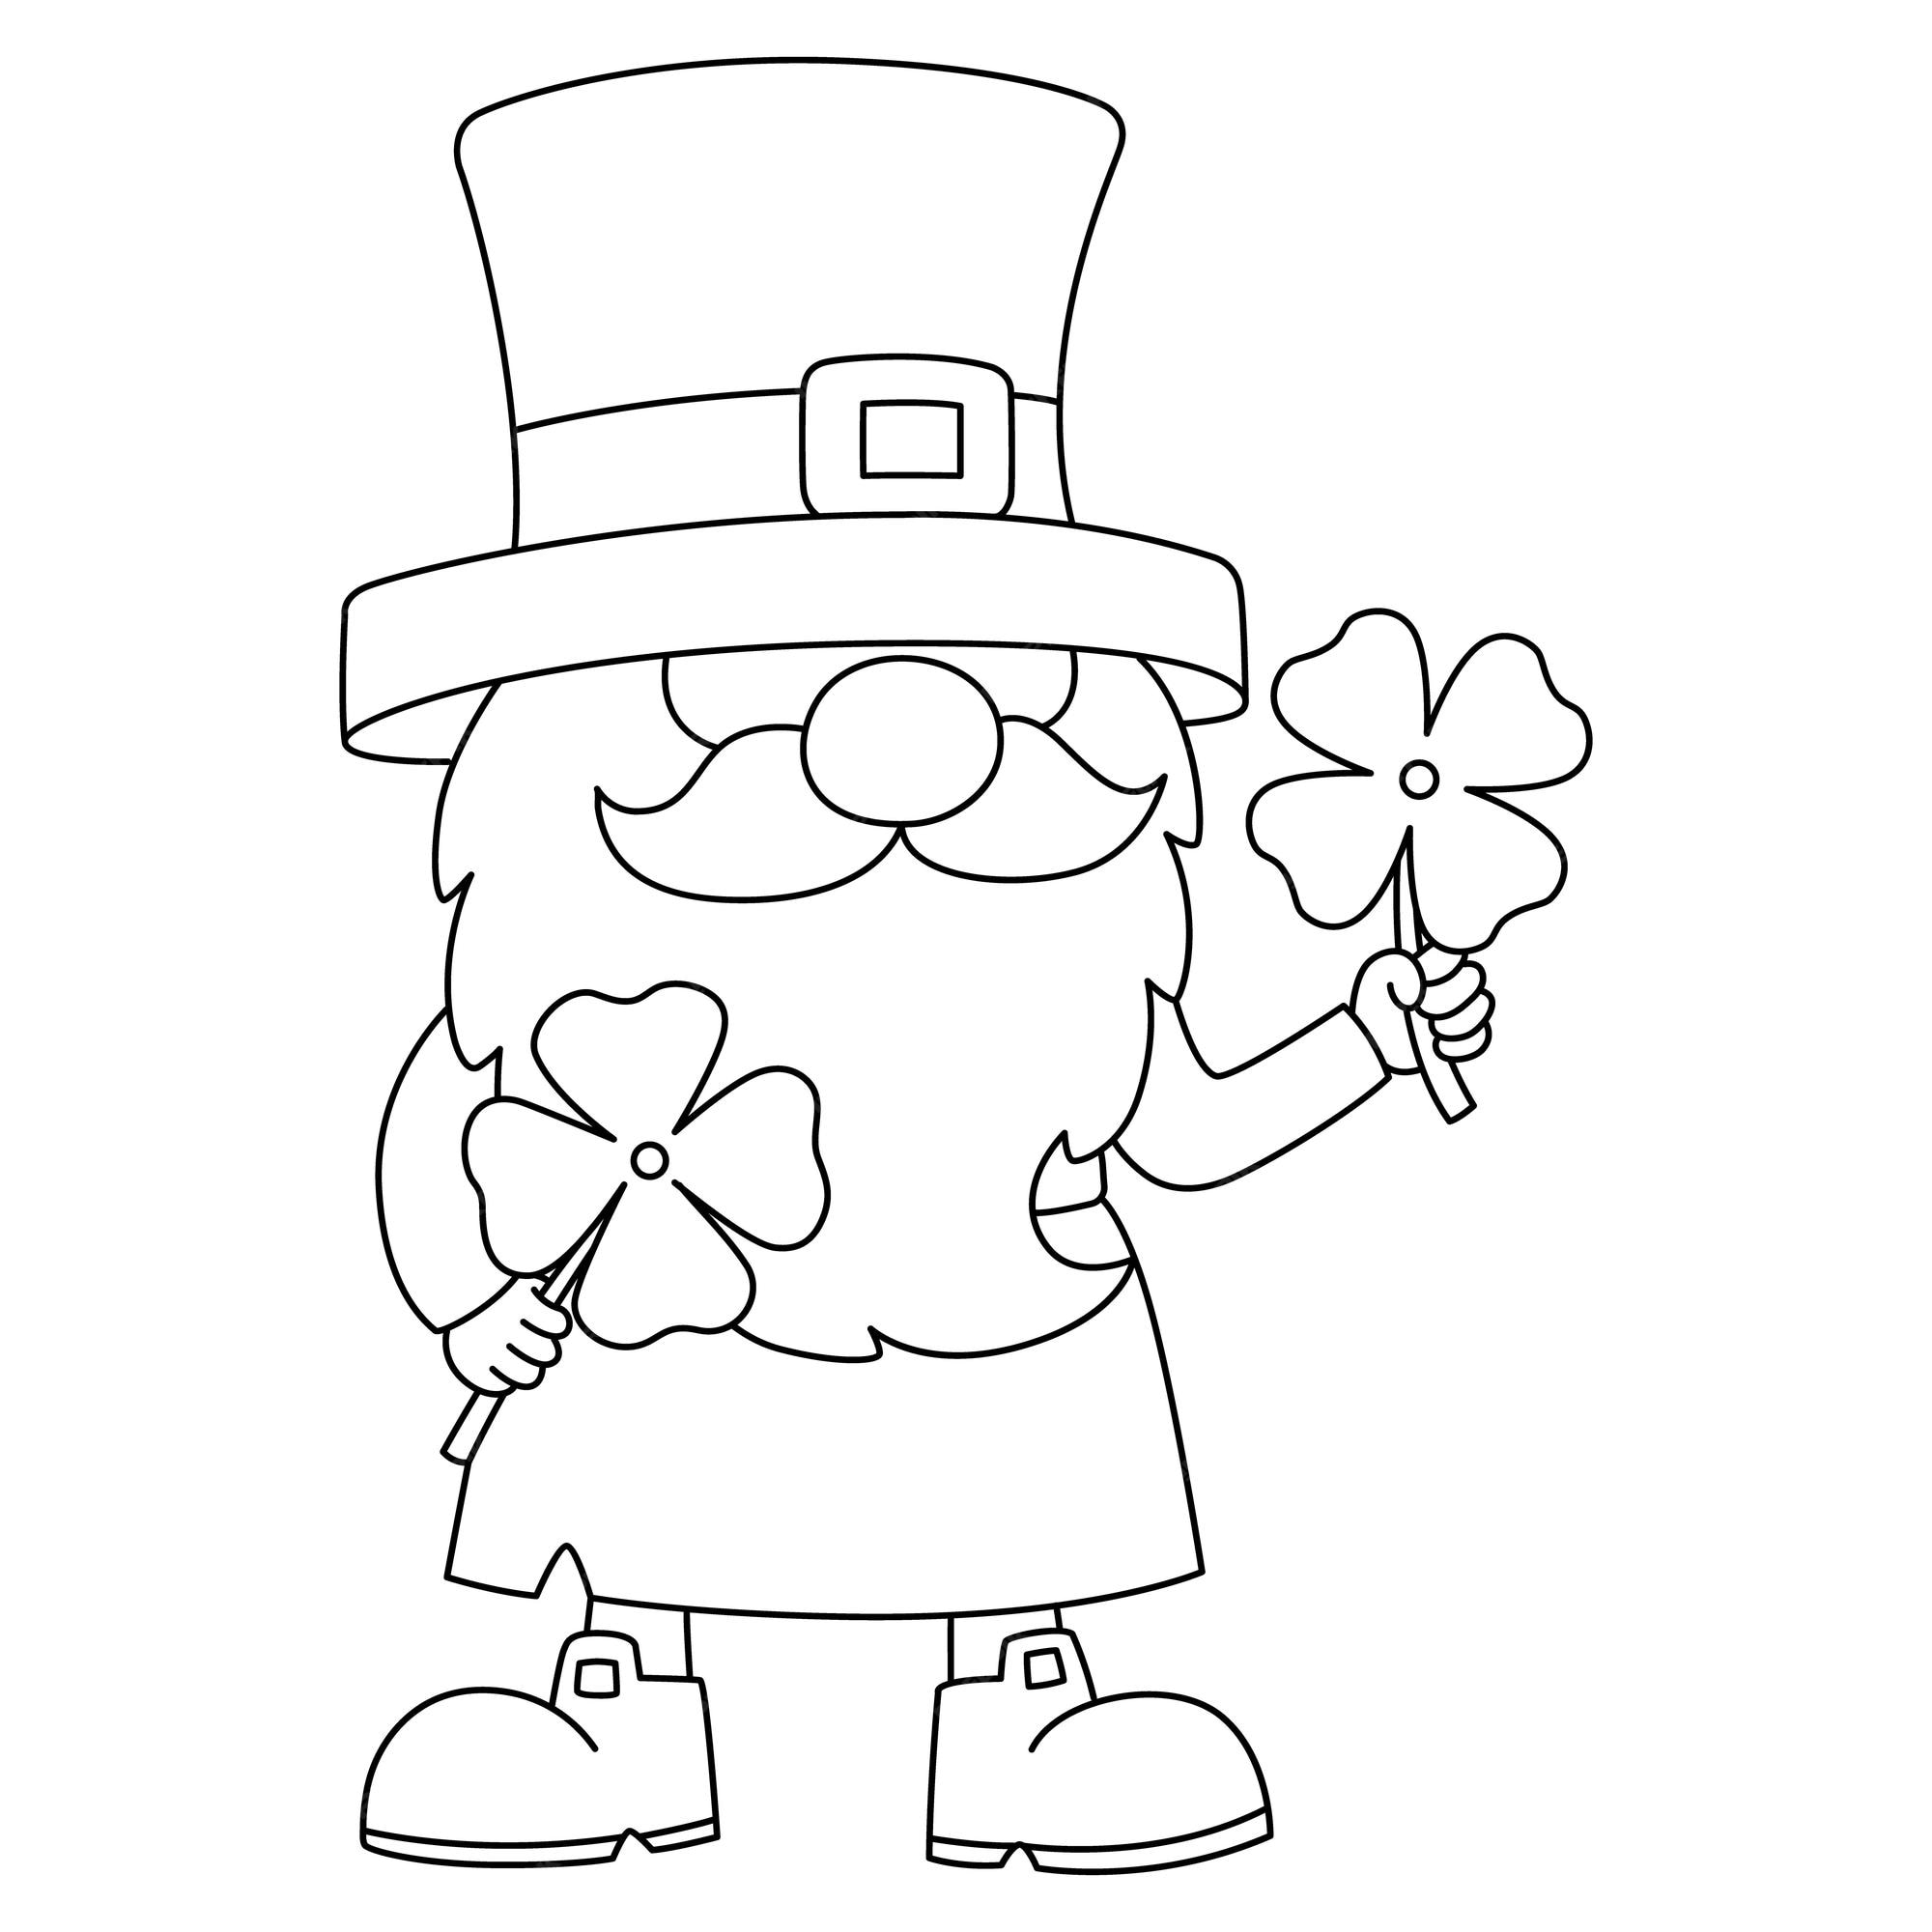 Premium vector a cute and funny coloring page of a st patricks day leprechaun gnome provides hours of coloring fun for children to color this page is very easy suitable